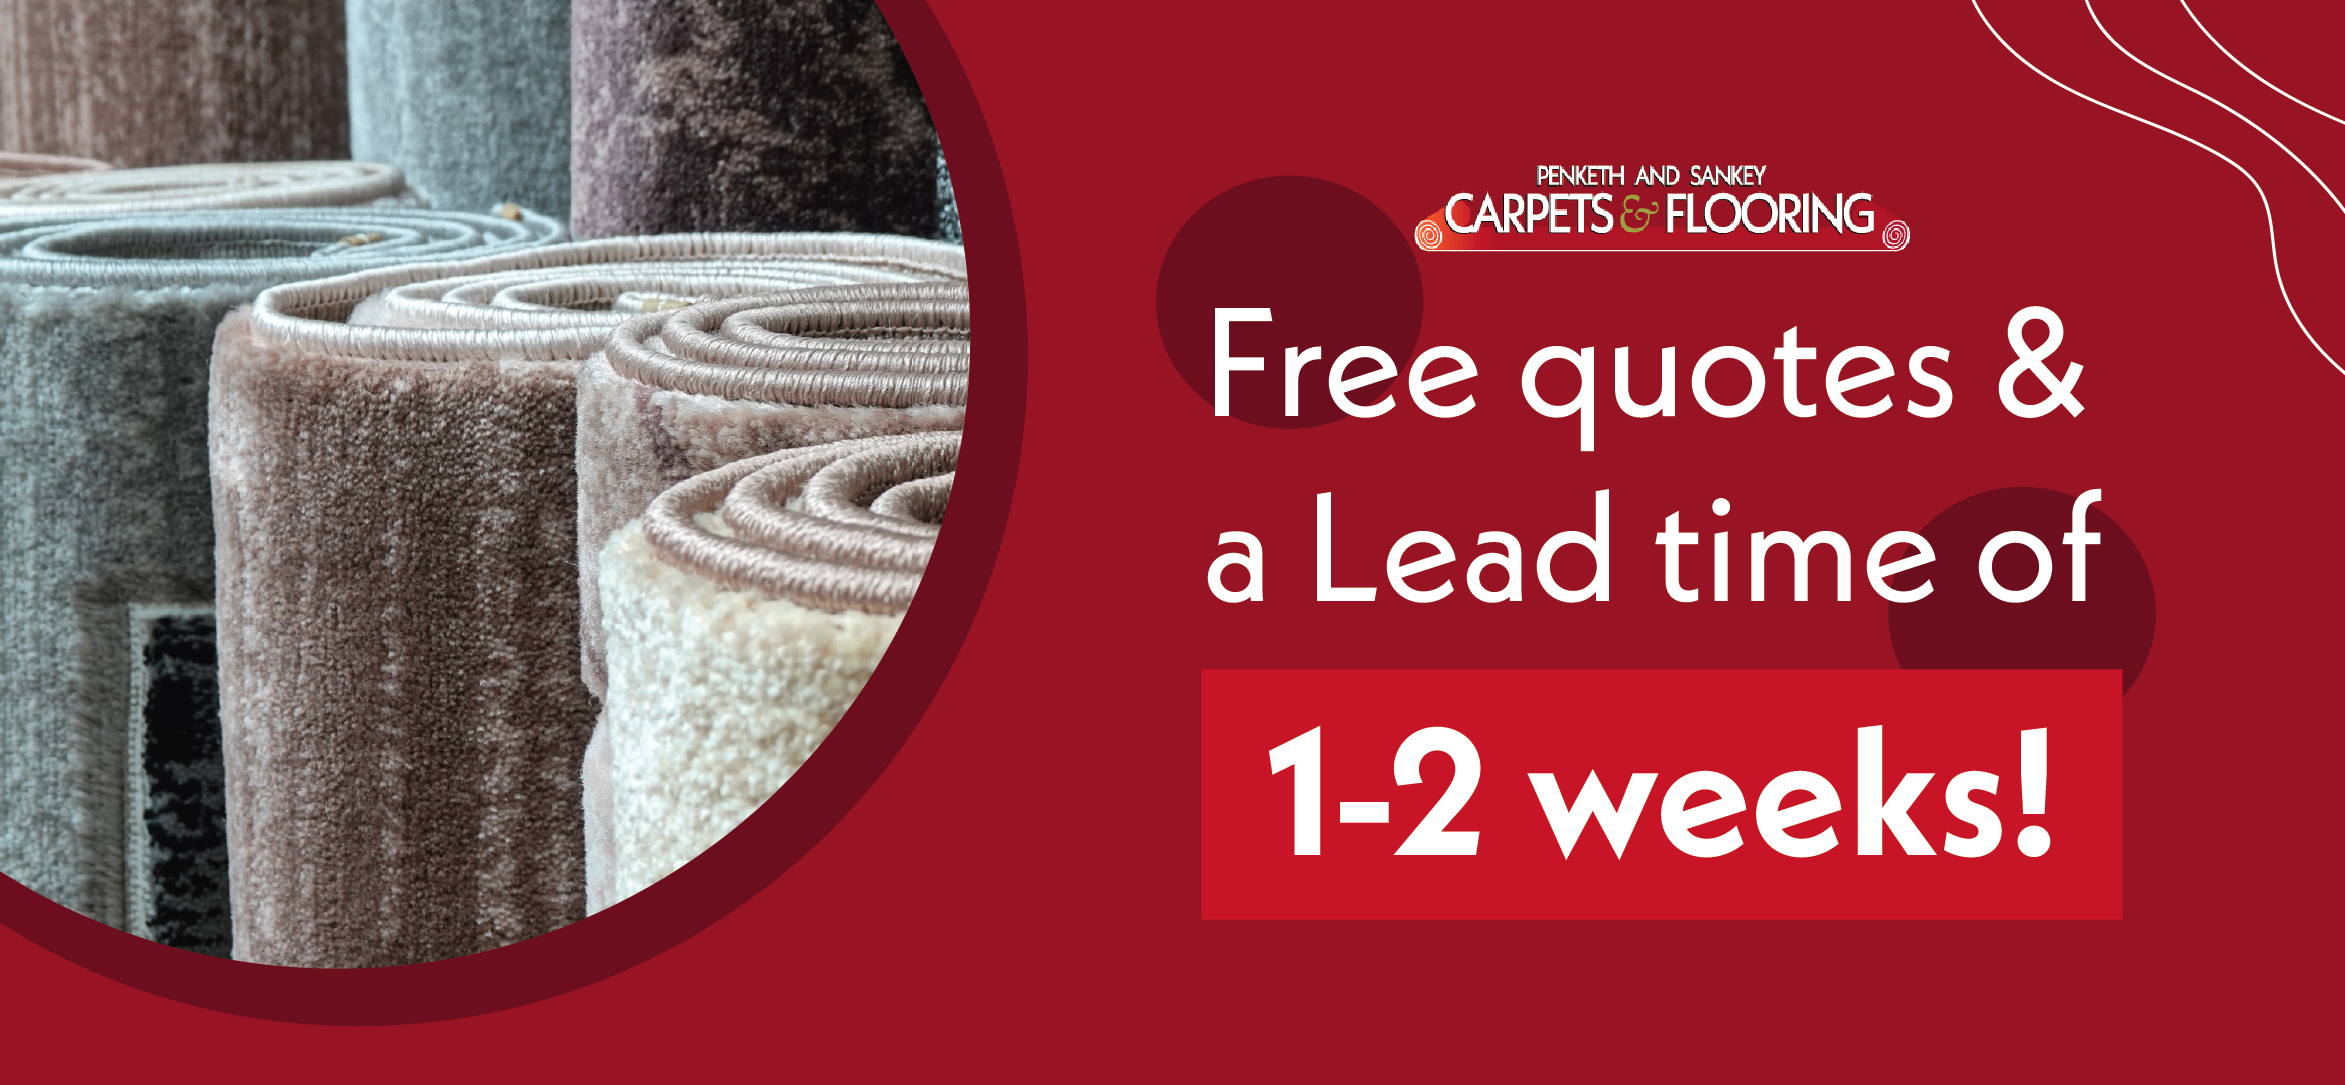 Free quotes and a lead time of 1-2 weeks for carpets and flooring in Warrington